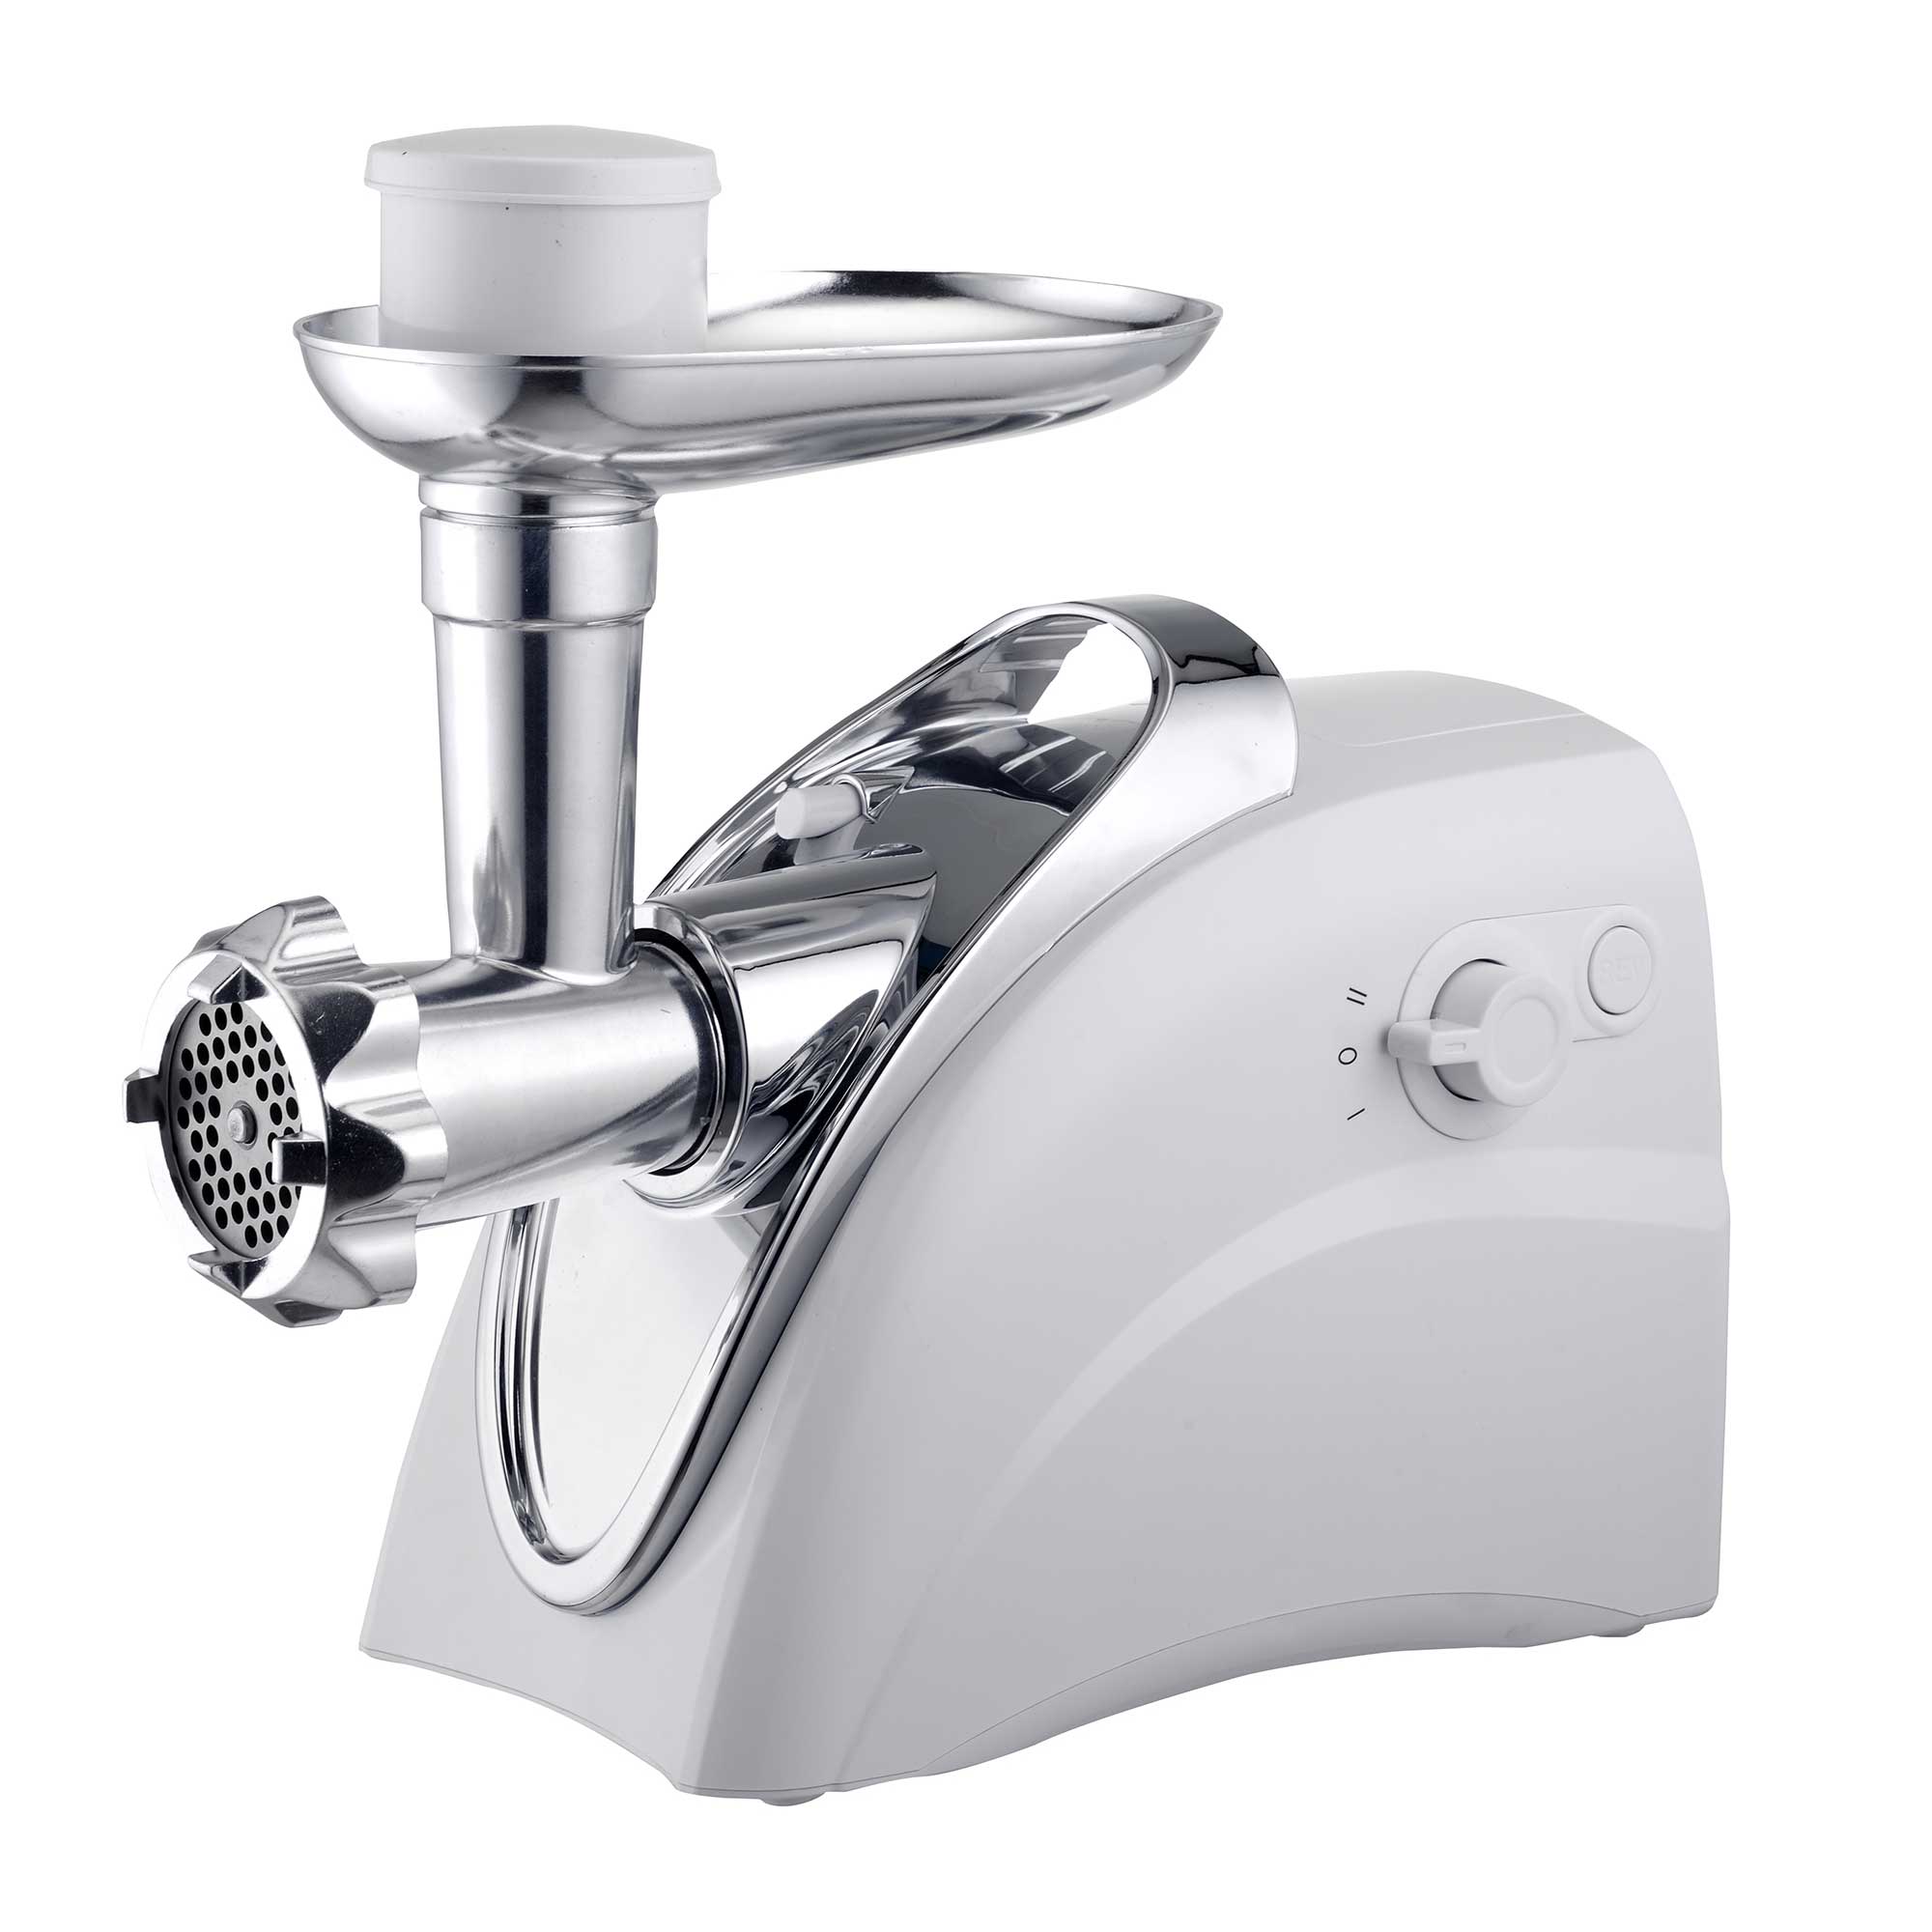 Brentwood MG-400W Electric Meat Grinder & Sausage Stuffer, White -  Brentwood Appliances